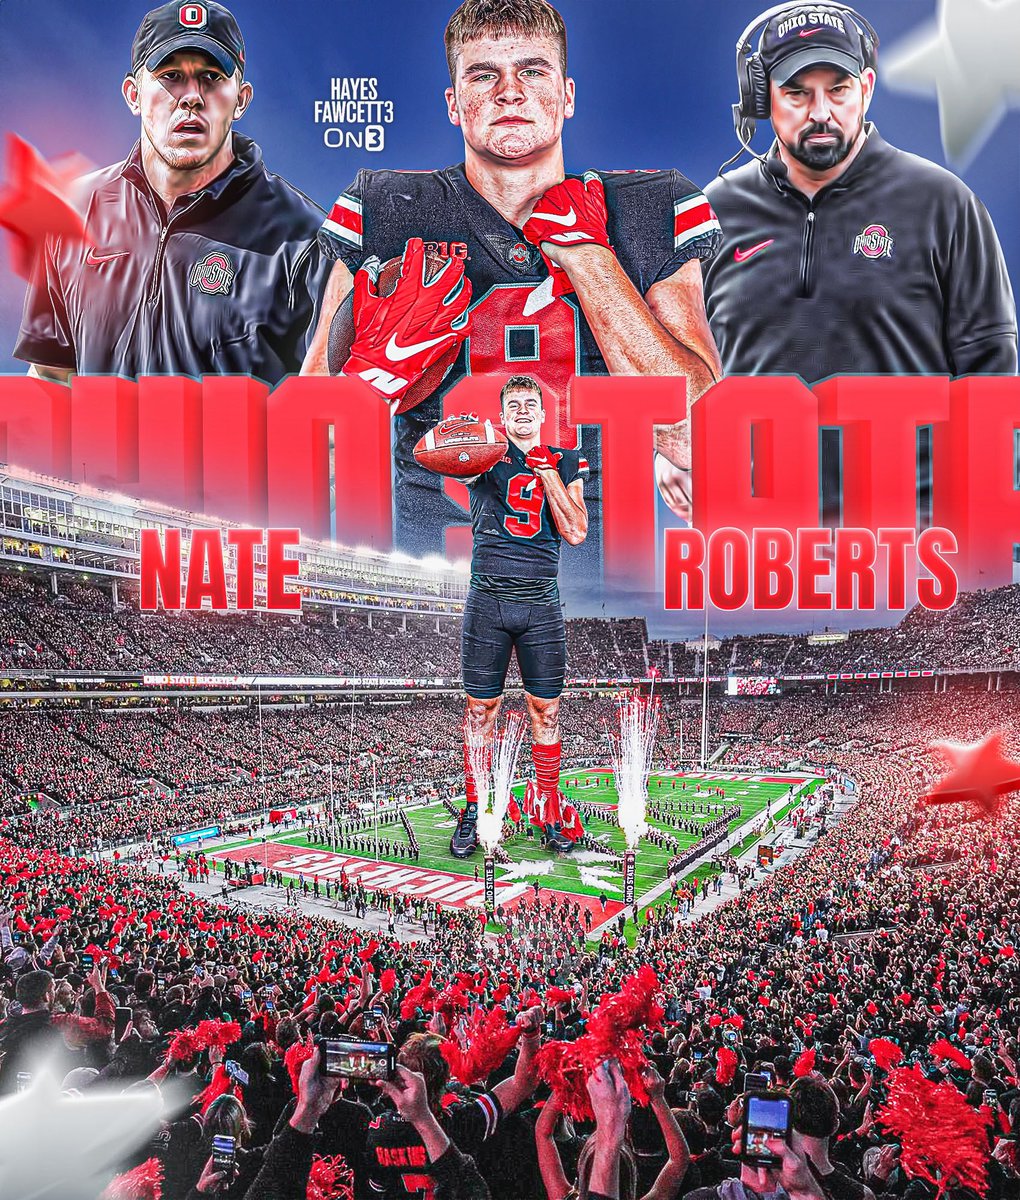 BREAKING: Four-Star TE Nate Roberts has Committed to Ohio State, he tells me for @on3recruits The 6’4 235 TE from Washington, OK chose the Buckeyes over Oregon and Oklahoma “This is the place to be, #GoBucks 🌰 on3.com/db/nate-robert…